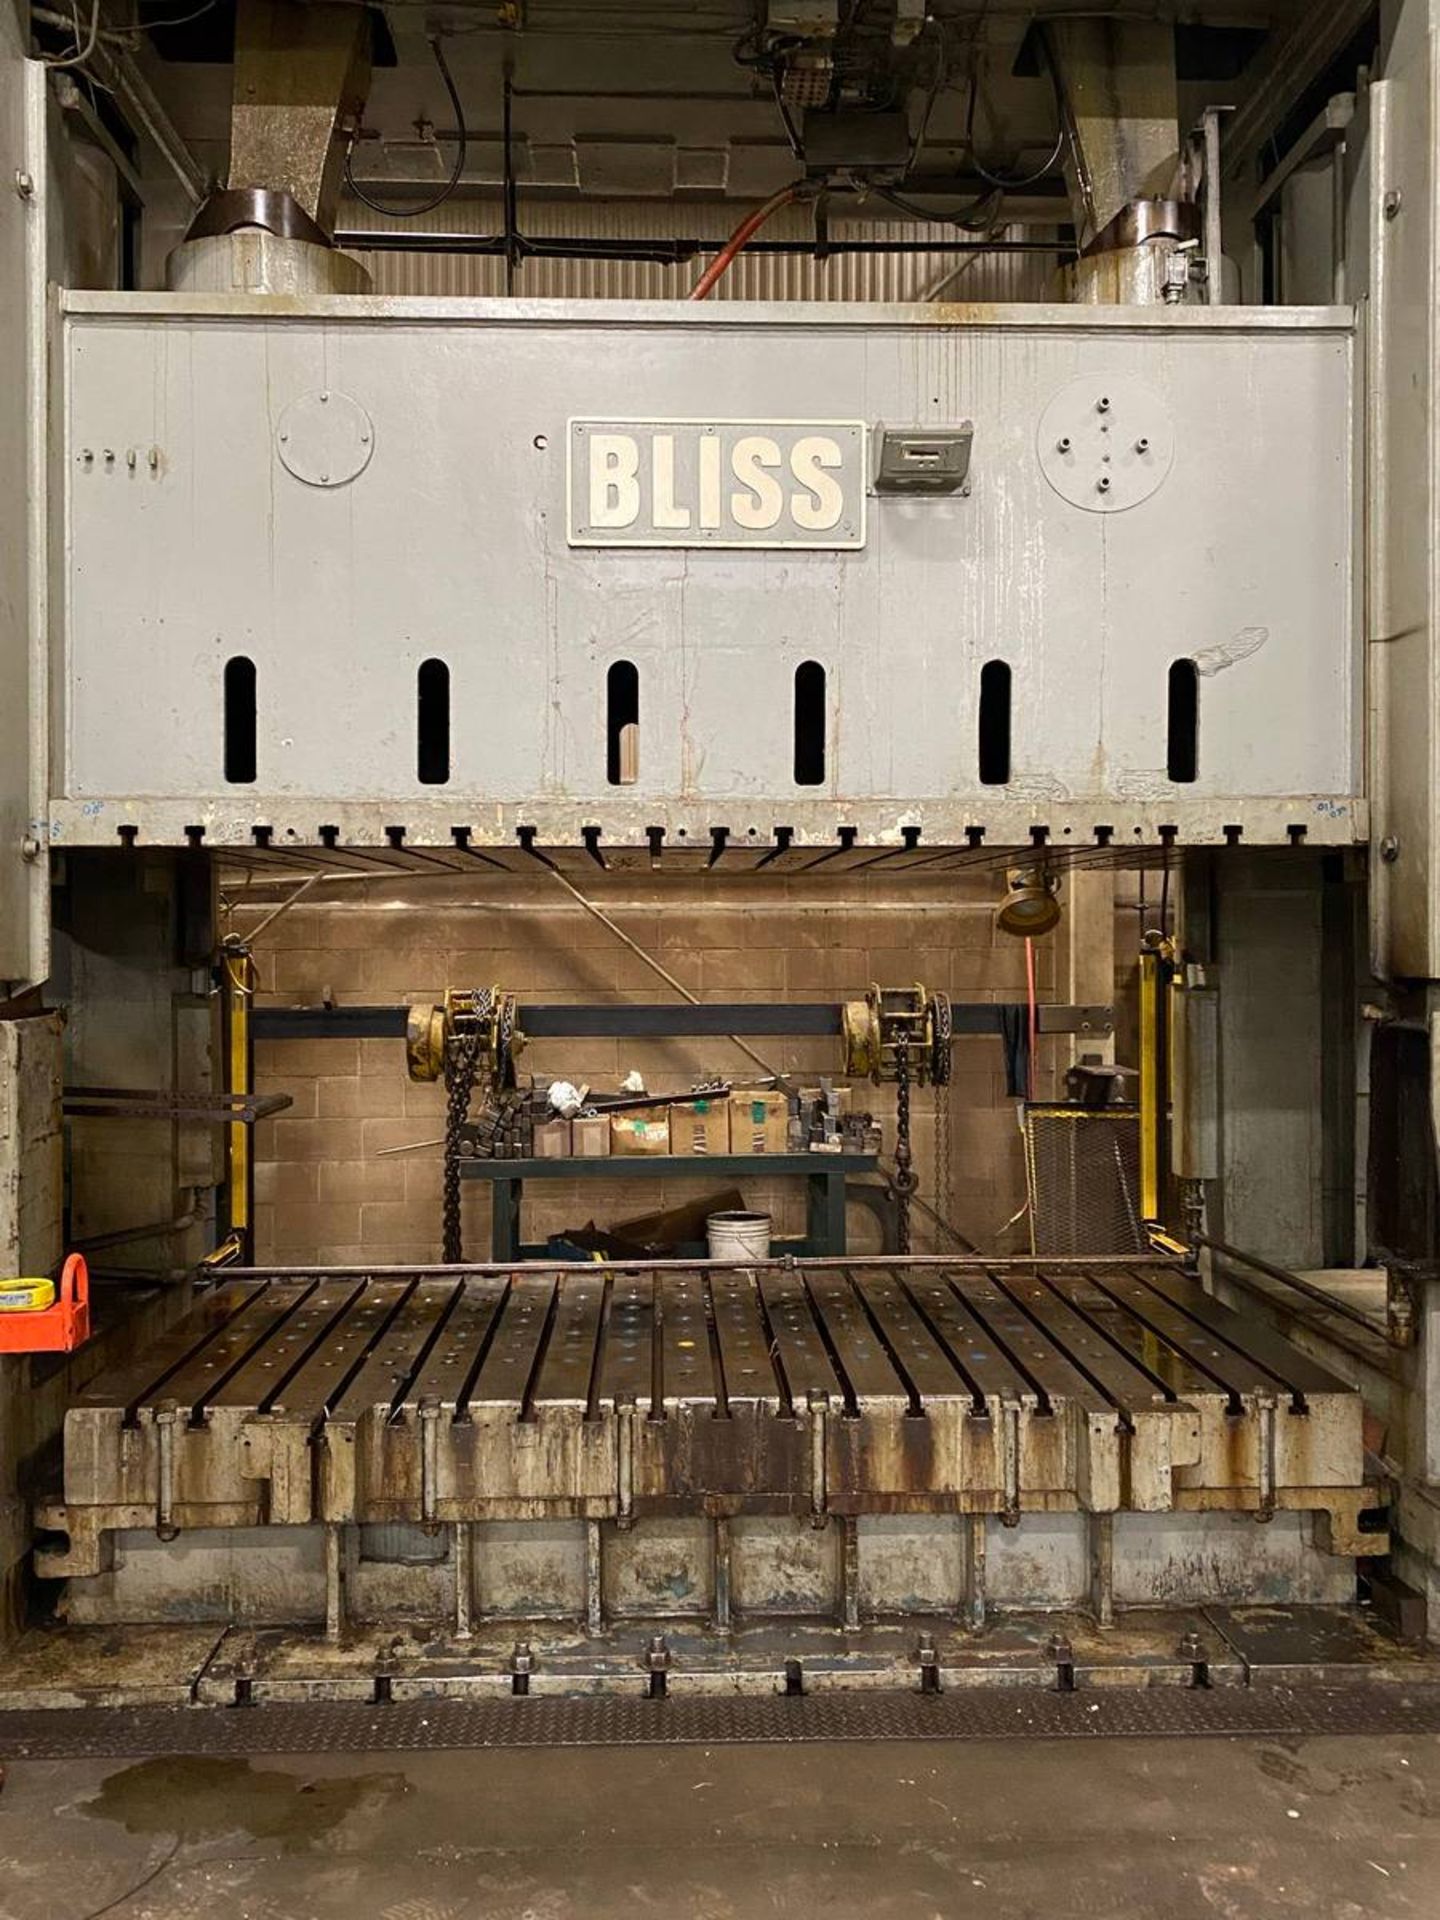 Bliss SE2-800-120x60 800-Ton Straight Side Two Point Press - Image 5 of 11